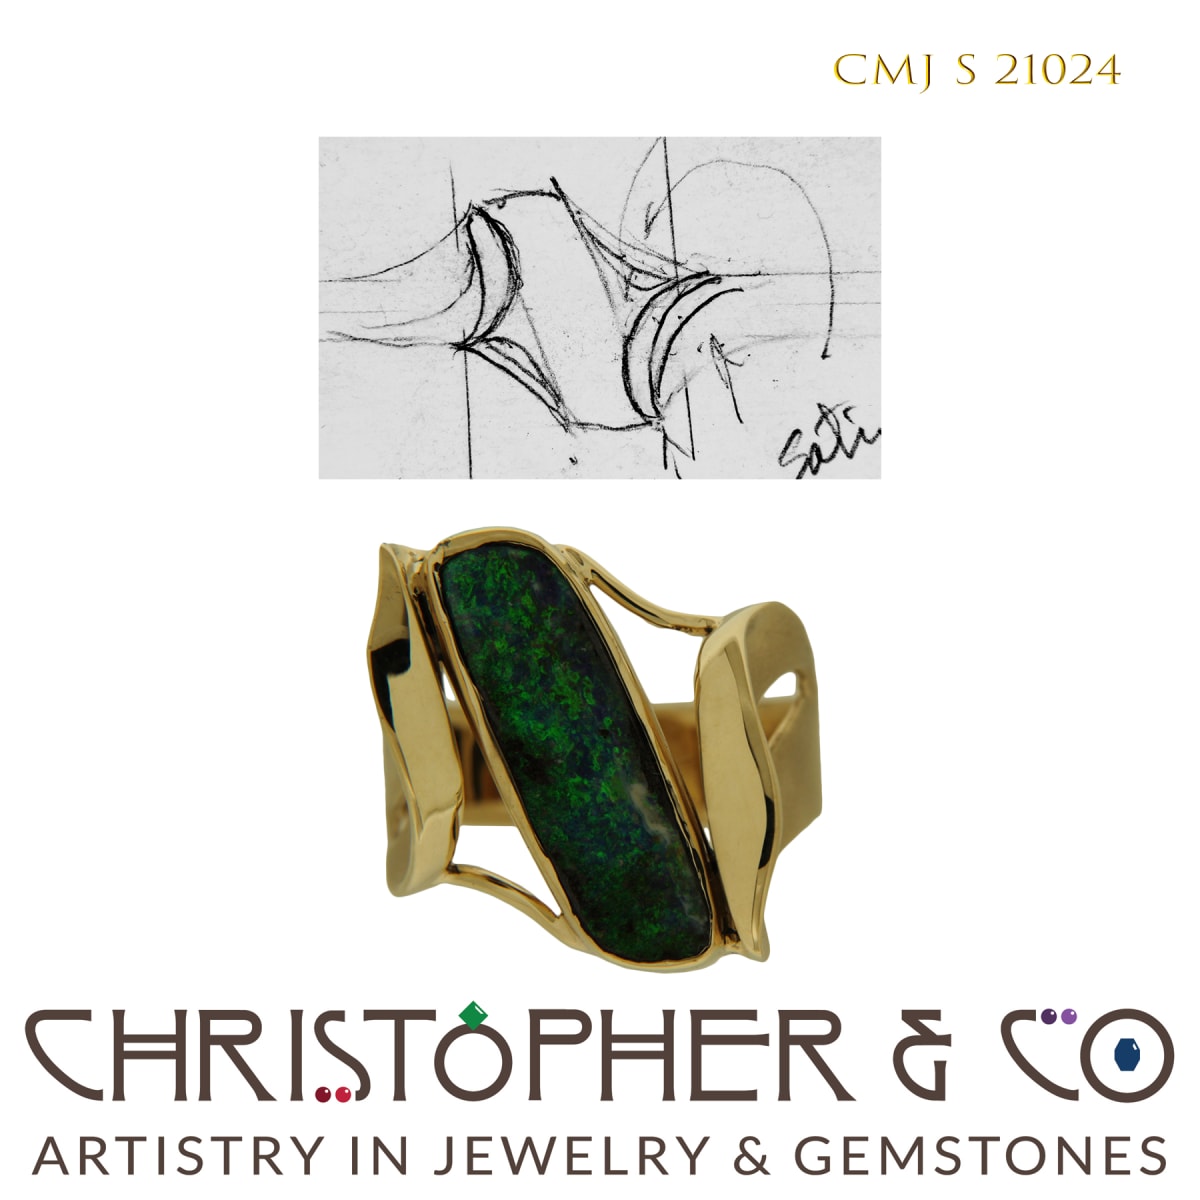 CMJ S 21024 Gold Ring by Christopher M. Jupp Set with Boulder Opal  Image: CMJ S 21024 Gold Ring by Christopher M. Jupp Set with Boulder Opal